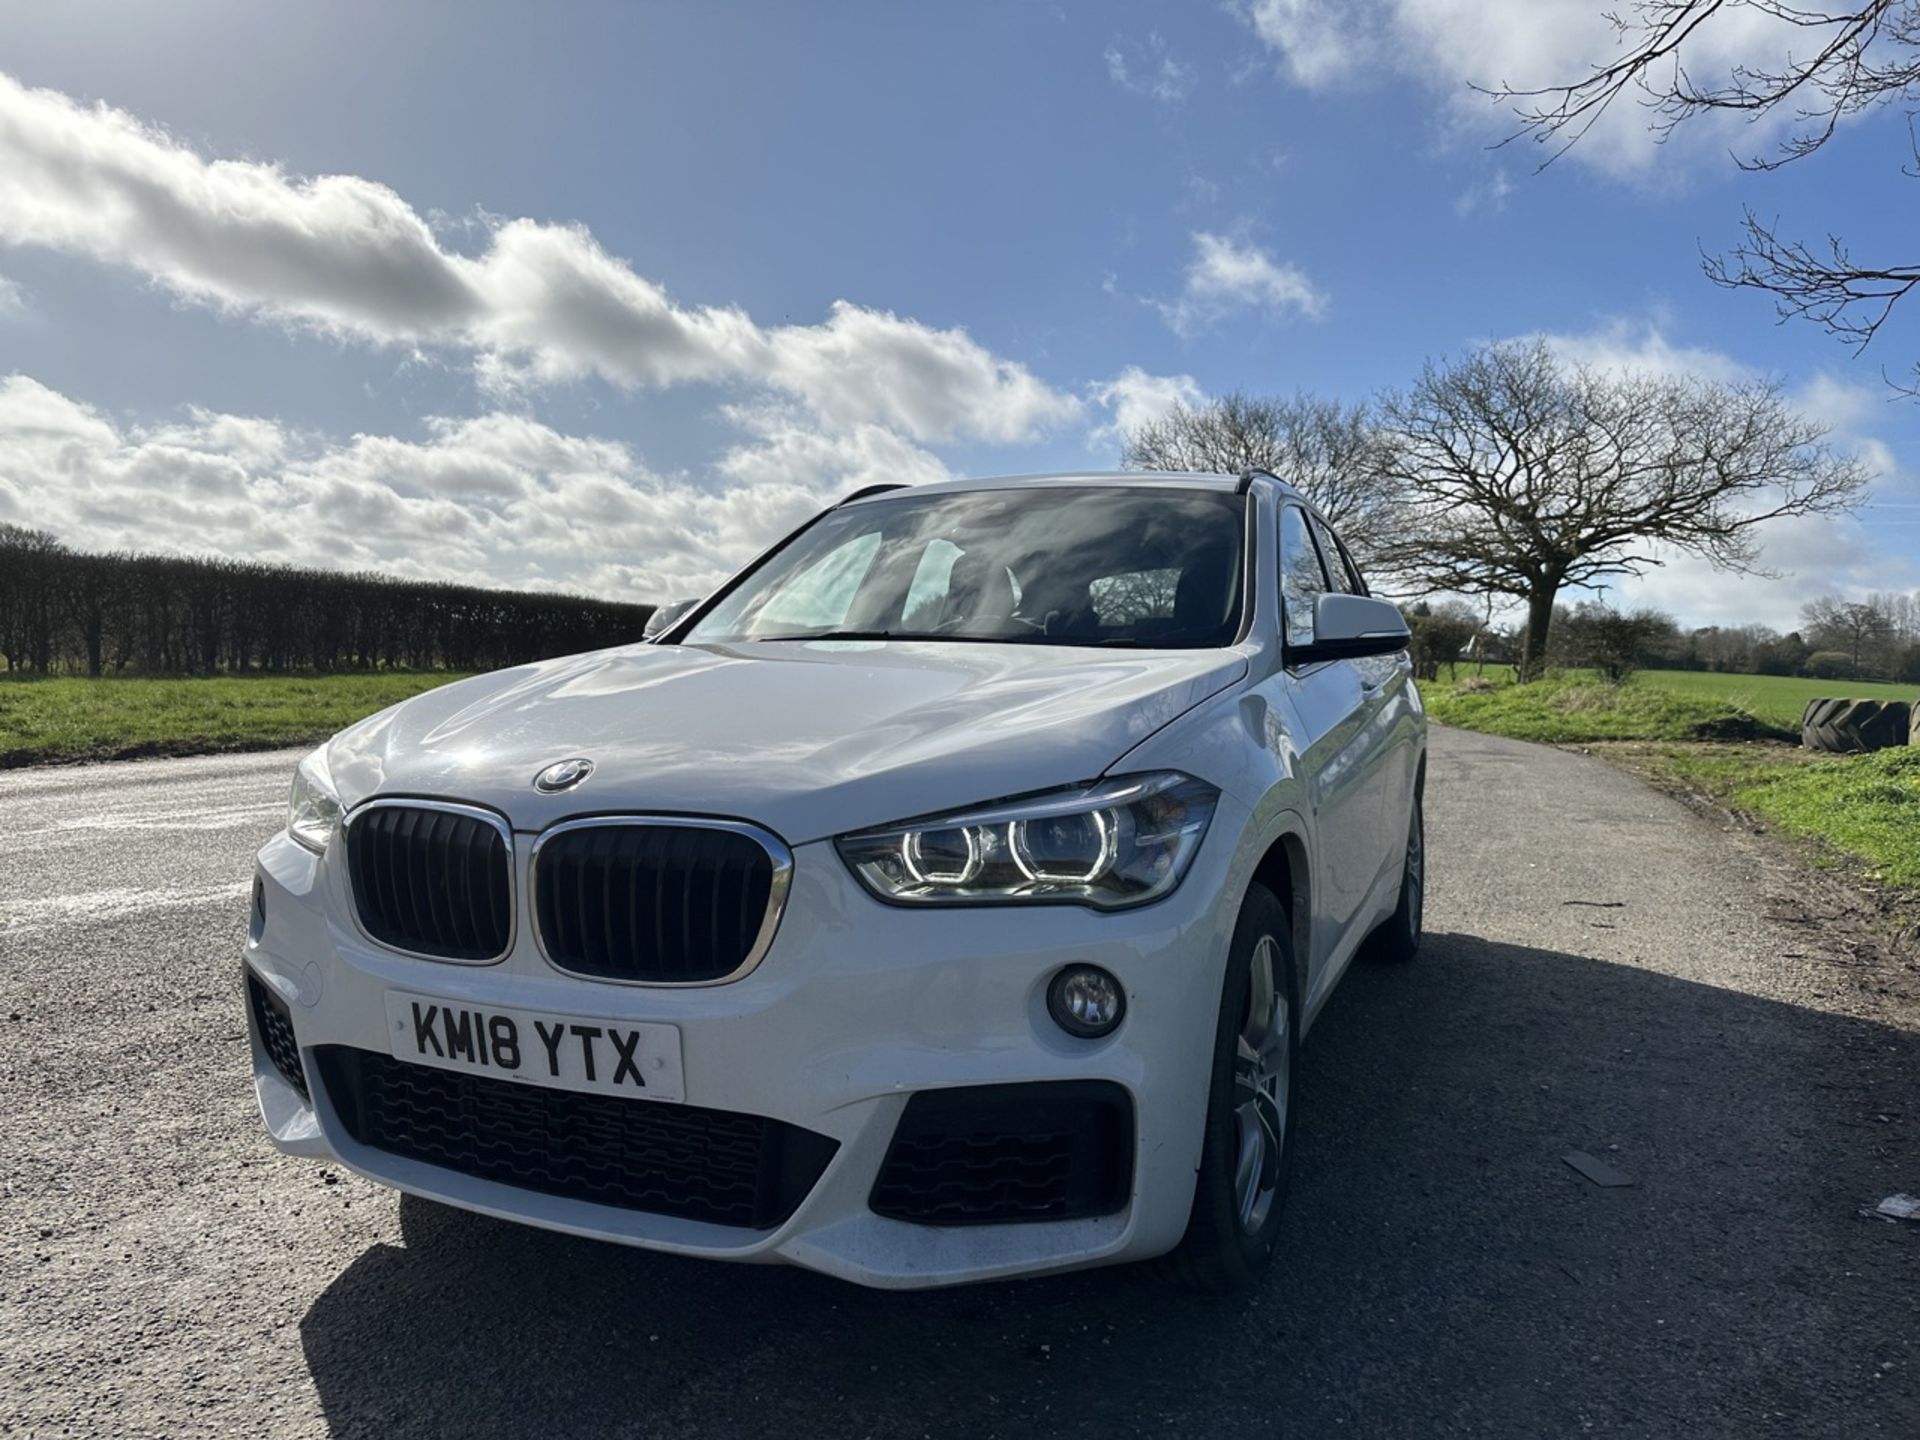 BMW X1 Xdrive20i M Sport Auto 20i - 2018 - 16.5k MILES ONLY - M SPORT Seats/badging - Image 6 of 38